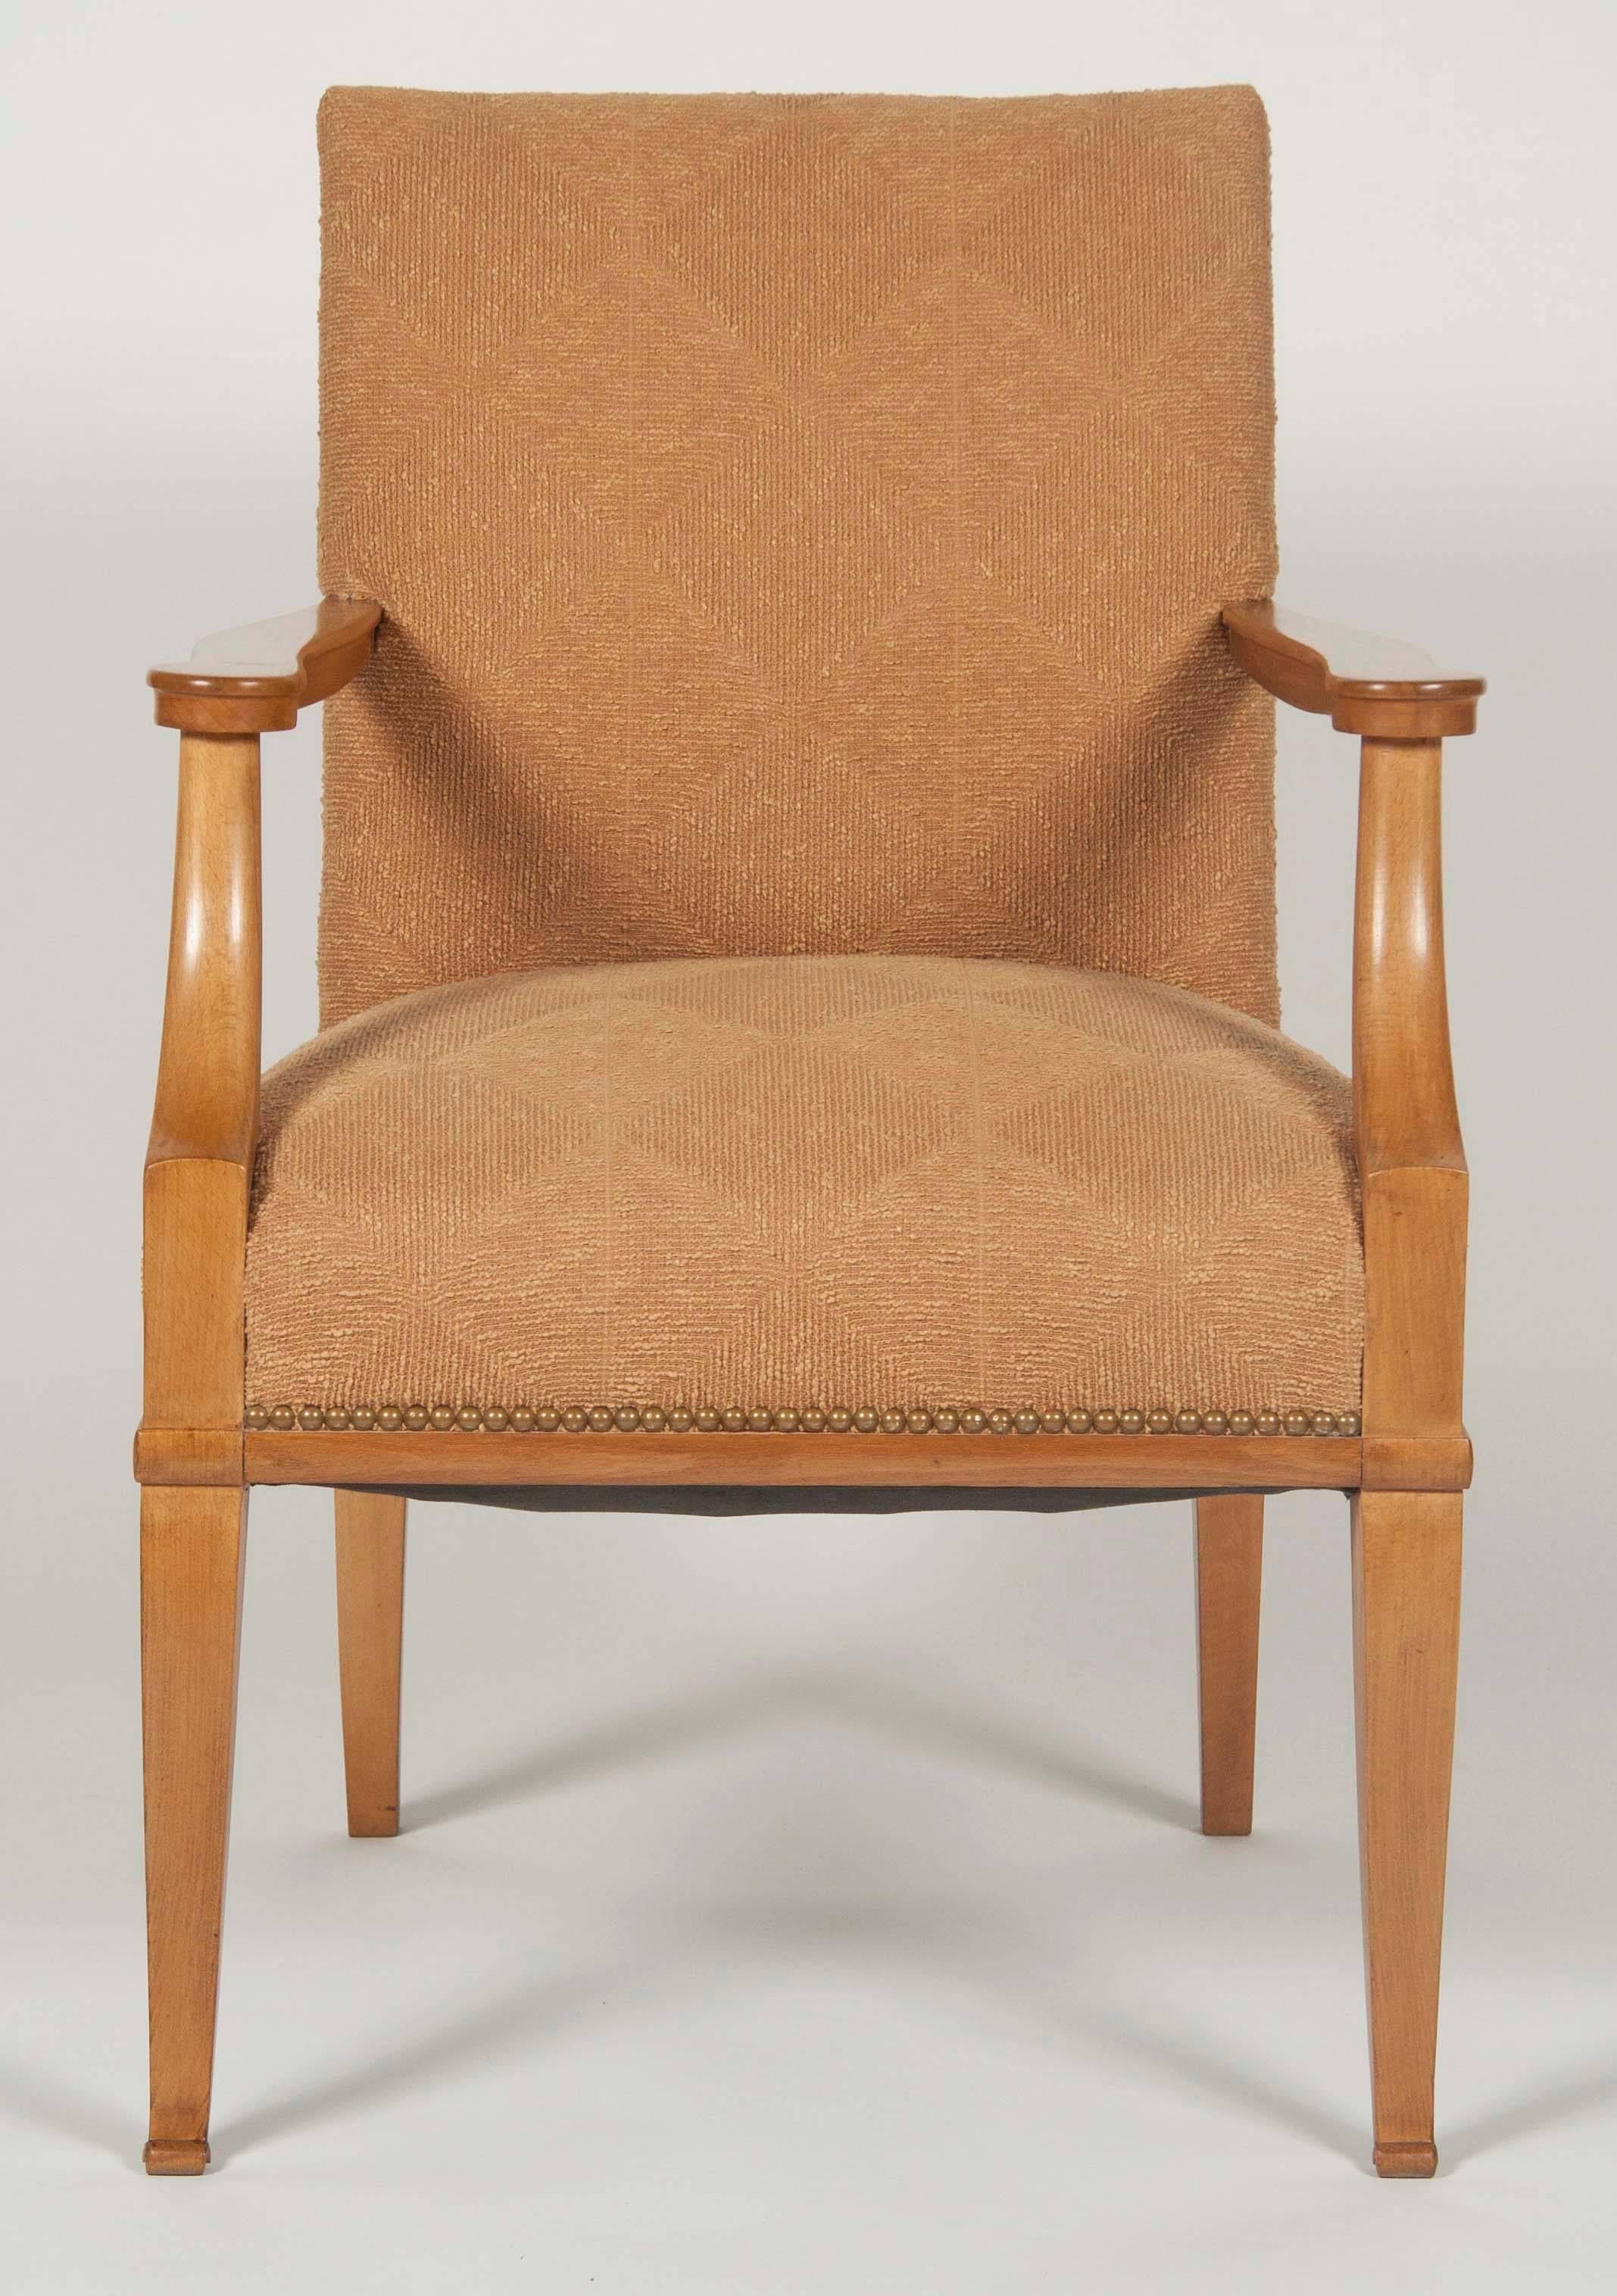 Mid-20th century, cherrywood armchair by renowned French architect, sculptor and furniture designer André Arbus (1903-1969), circa 1940.